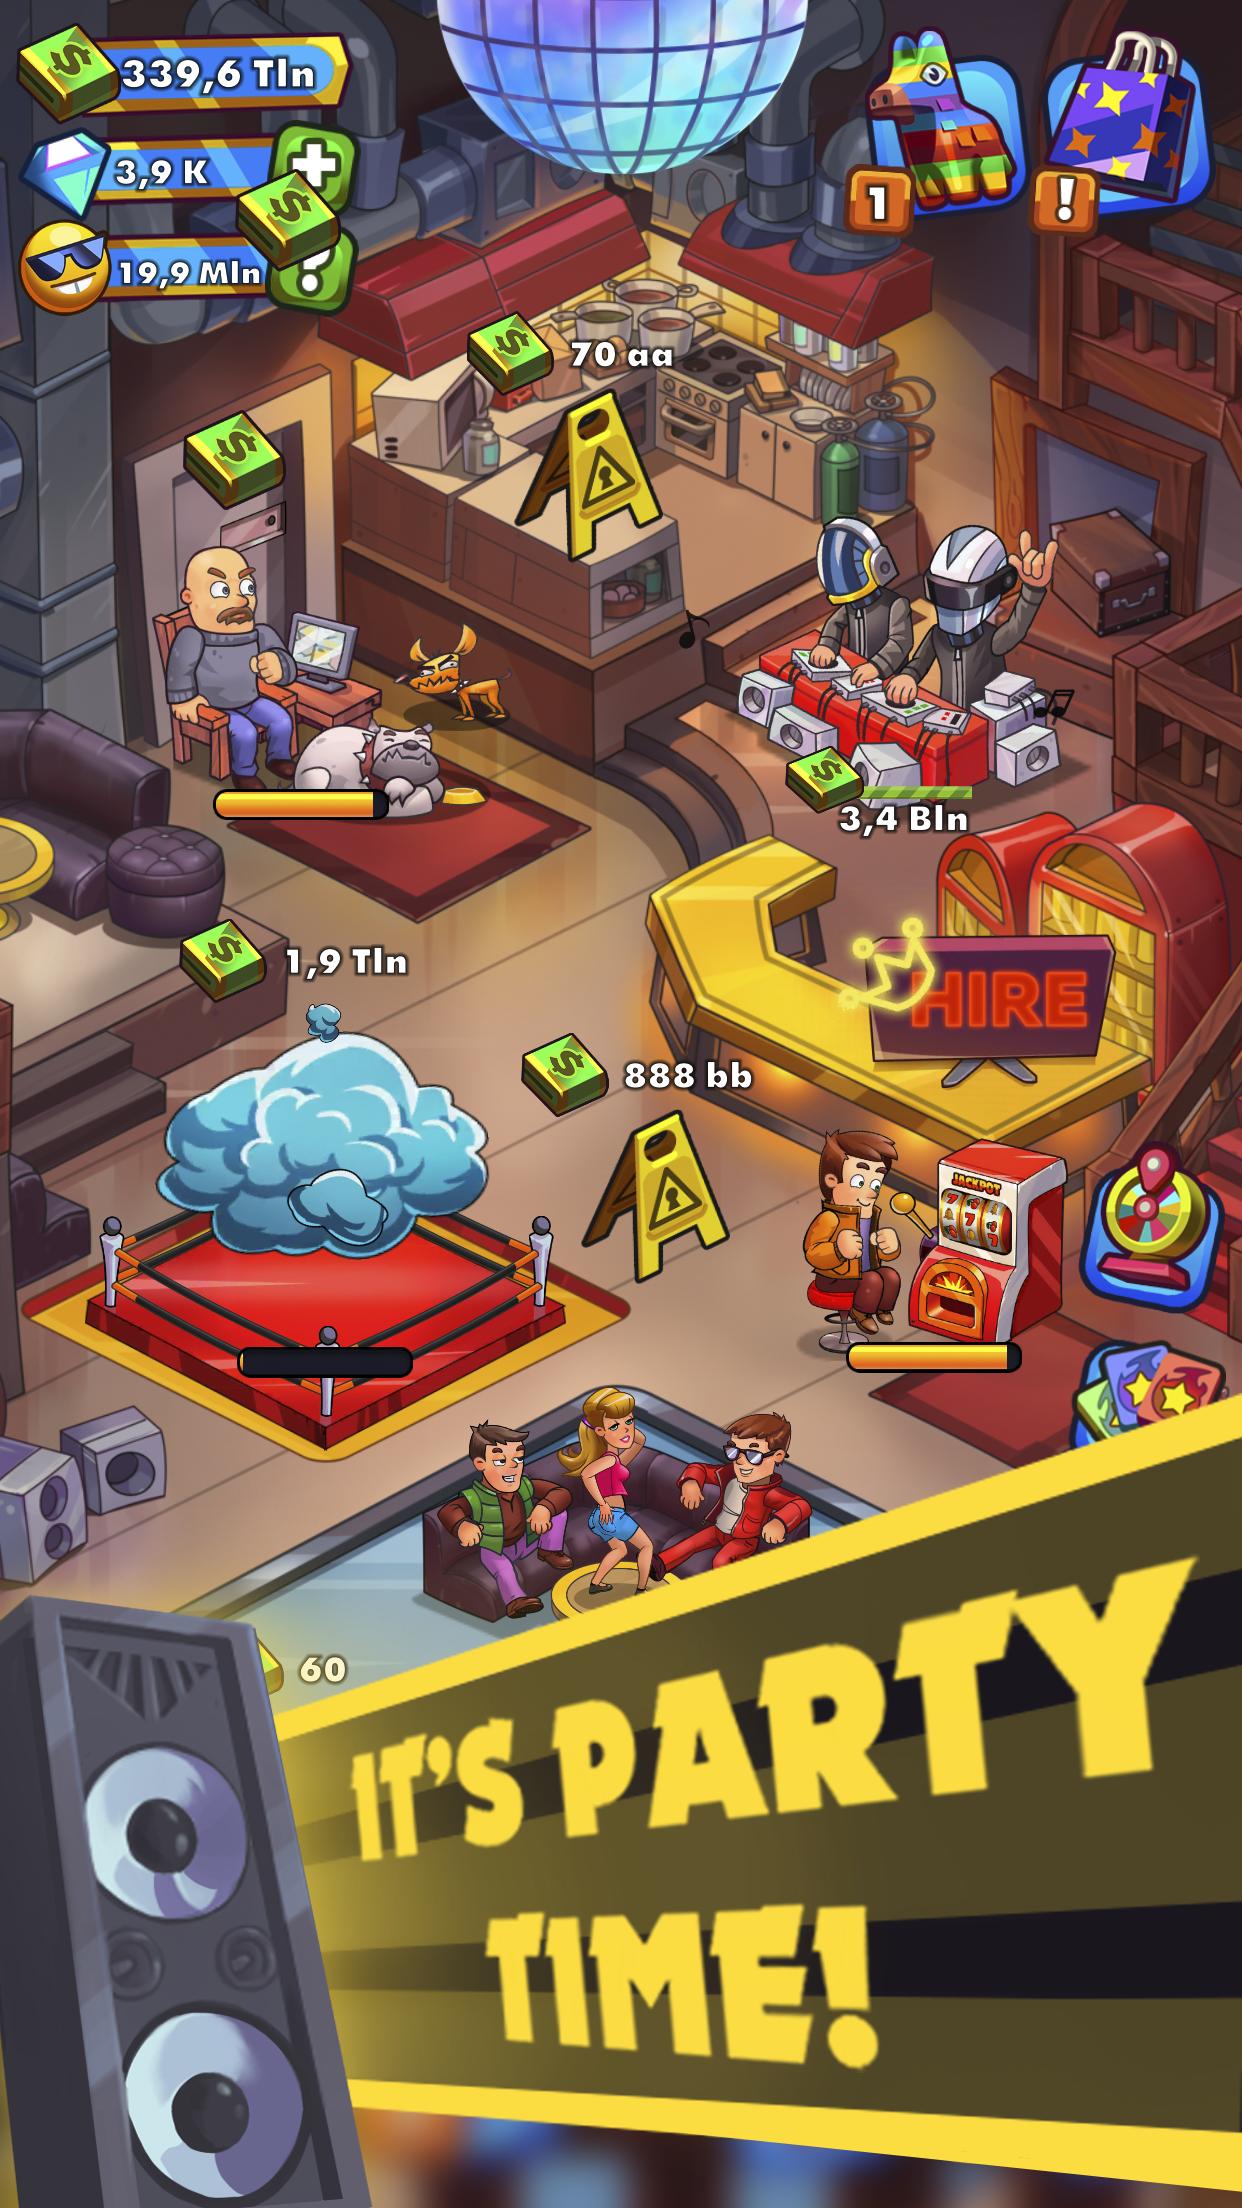 House party free download mac